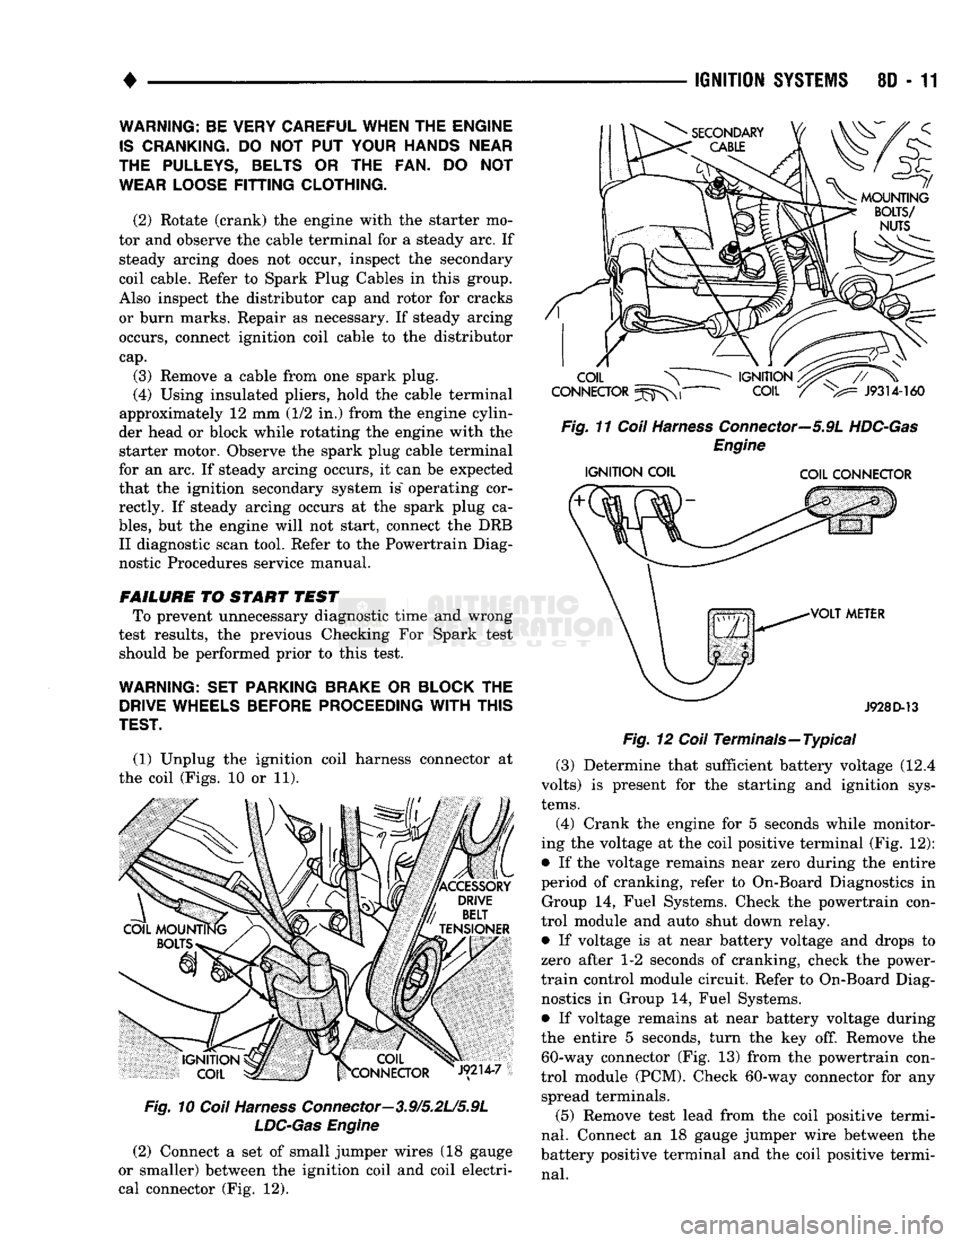 DODGE TRUCK 1993  Service Repair Manual 
* 
(1) Unplug the ignition coil harness connector at 
the coil (Figs. 10 or 11). 

Fig.
 10
 Coil
 Harness
 Connector—3.9/5.2L/5.9L 
 LDC-Gas
 Engine 

(2) Connect a set of small jumper wires (18 g